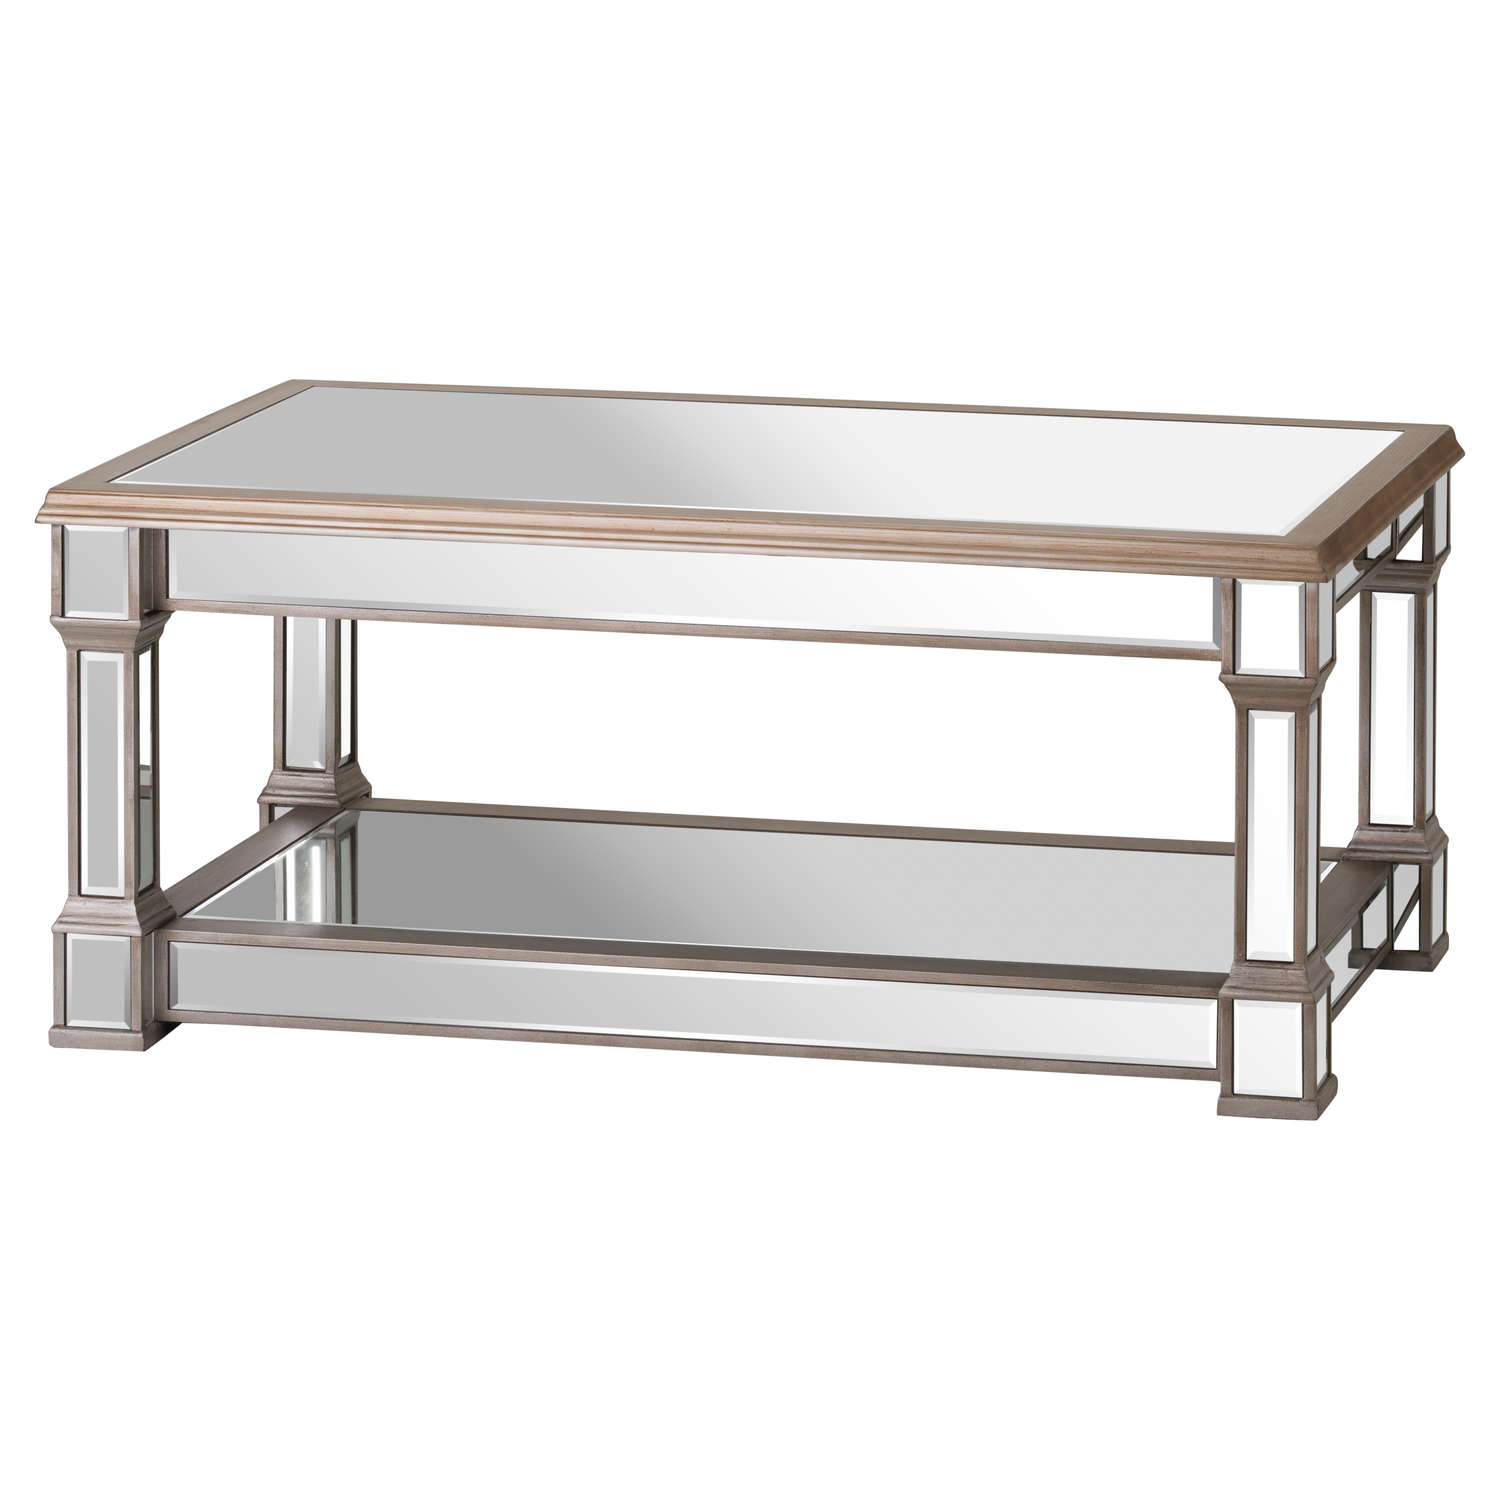 The Belfry Collection Mirrored Display Coffee Table